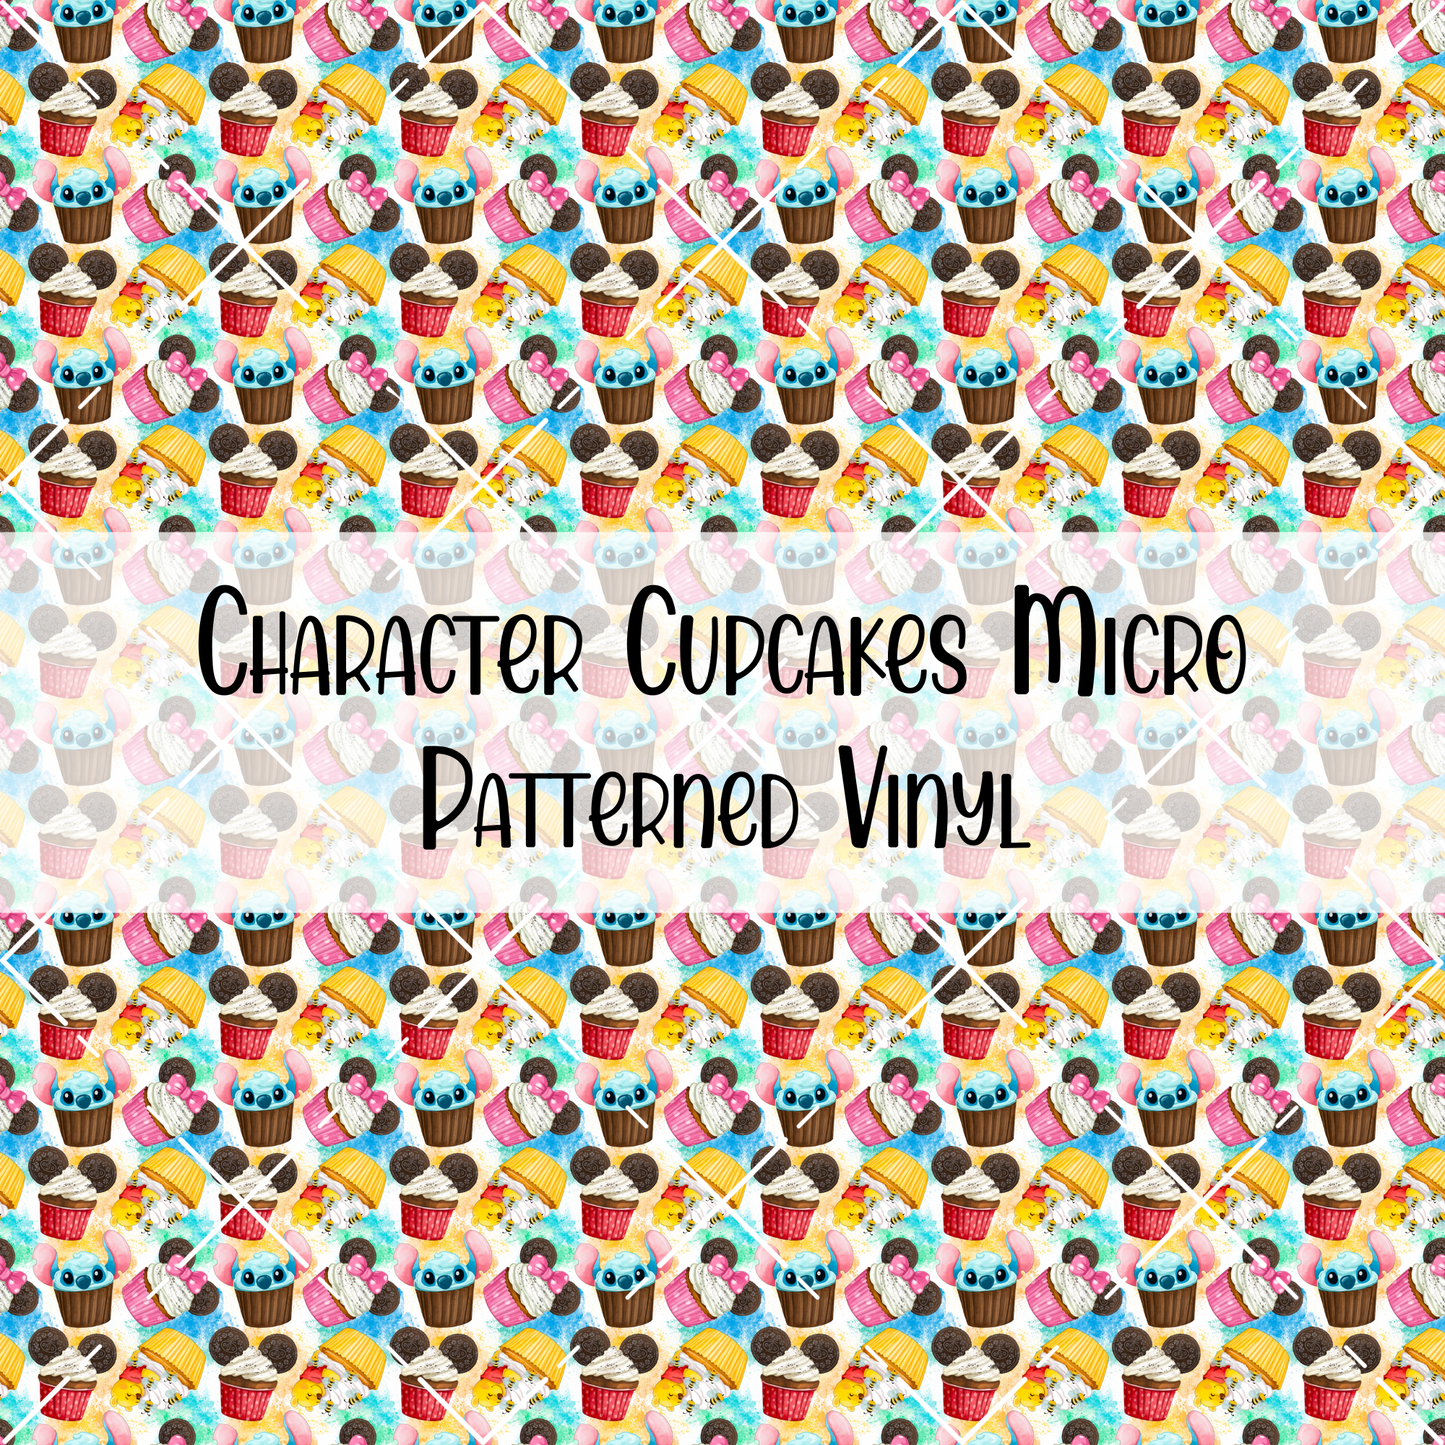 Character Cupcakes Patterned Vinyl